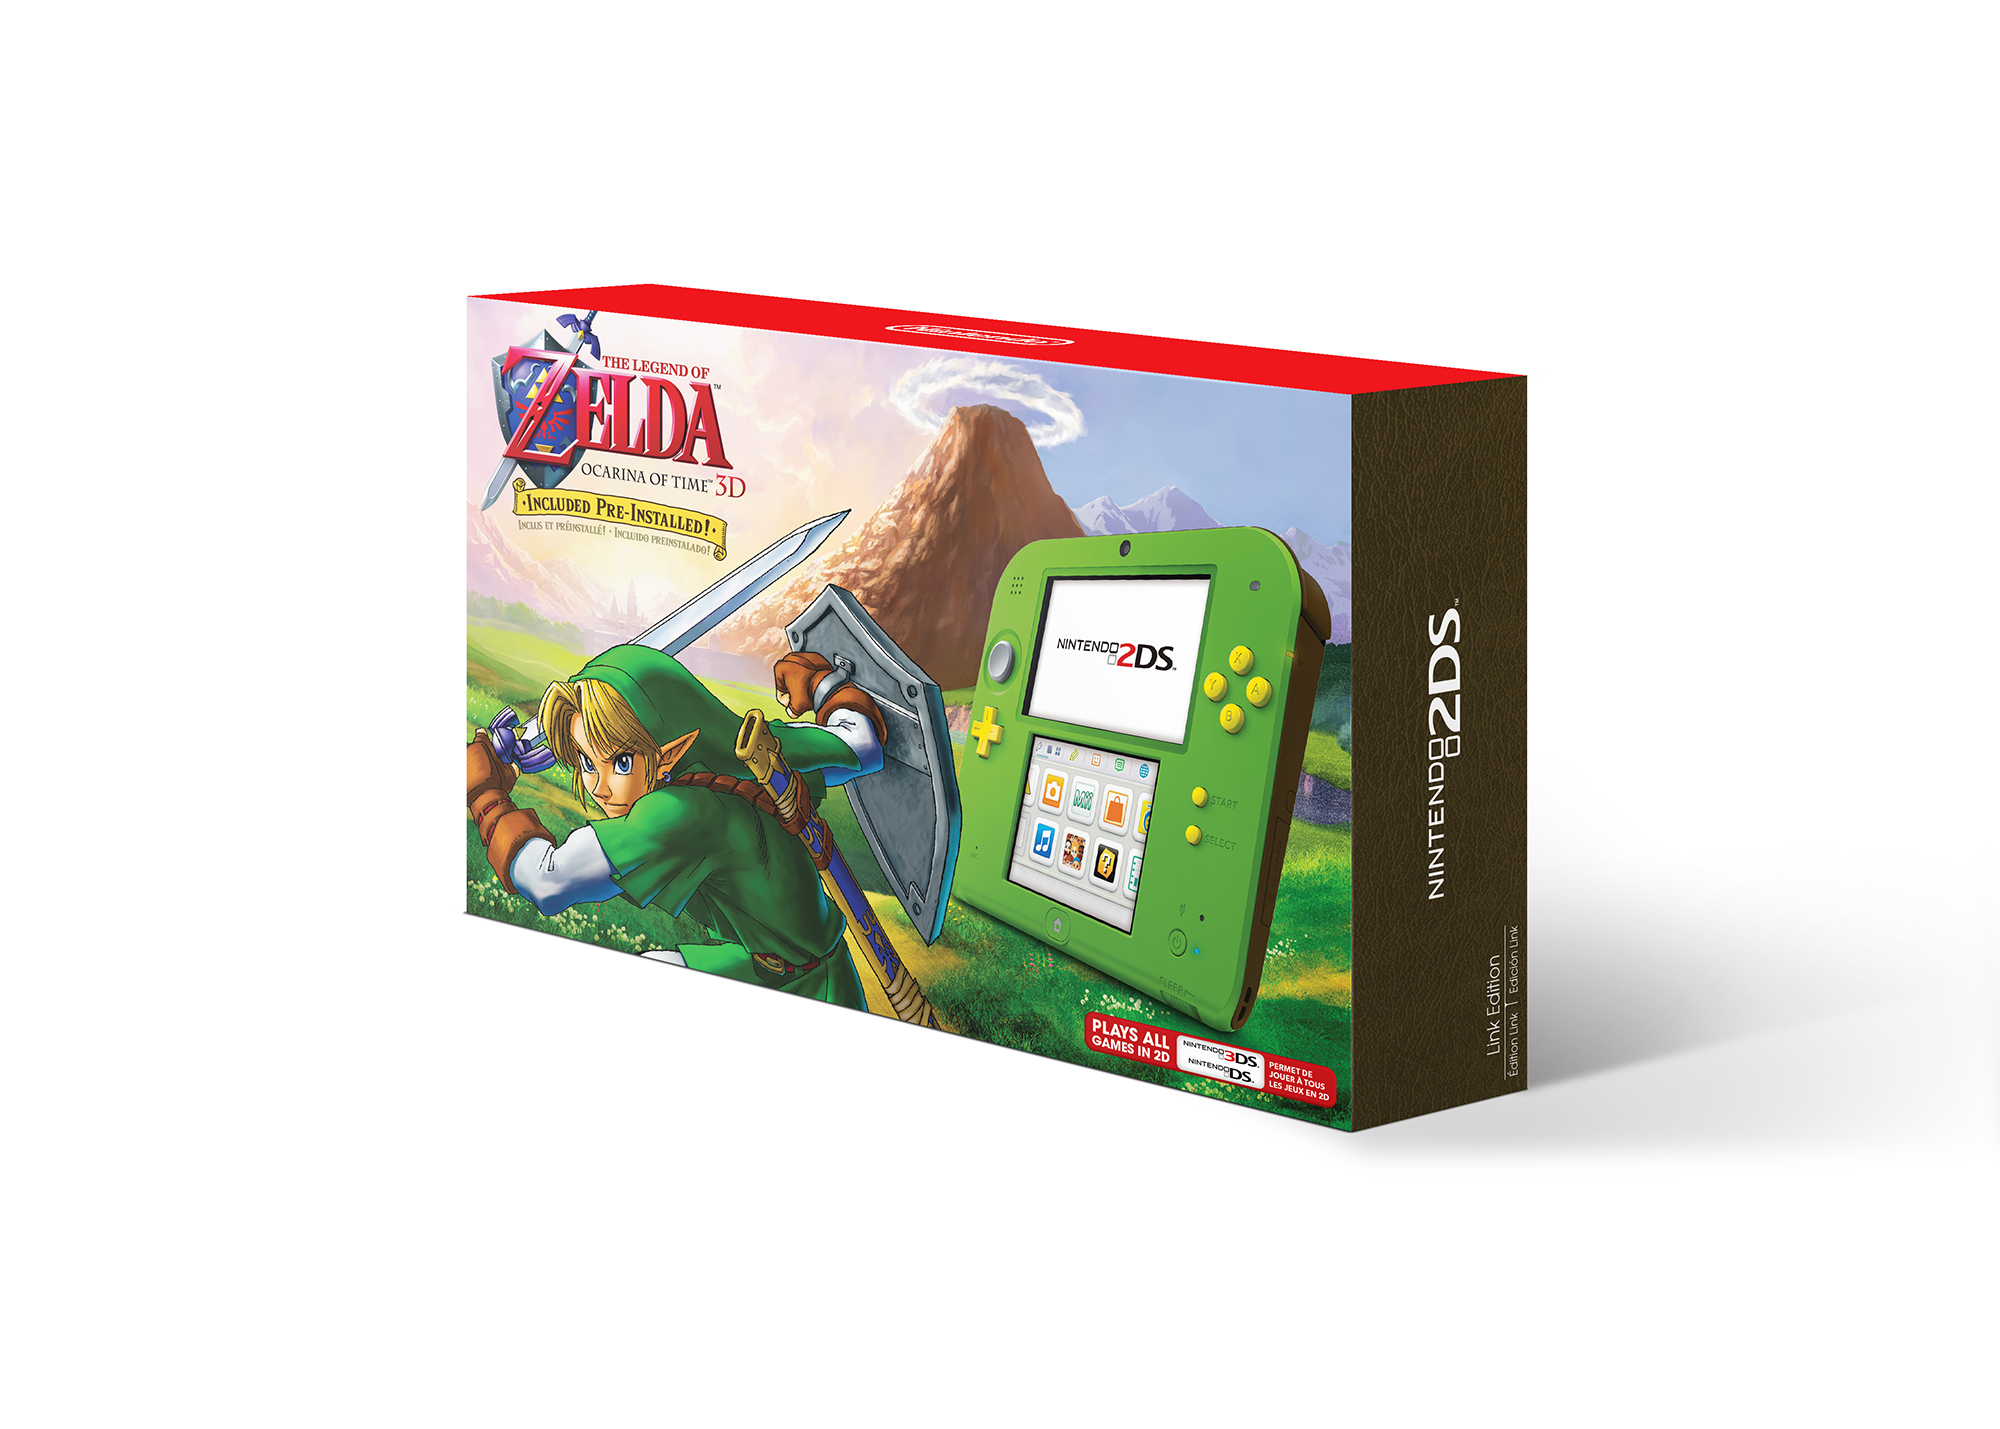 Nintendo 2DS System with The Legend of Zelda: Ocarina of Time 3D - image 2 of 6